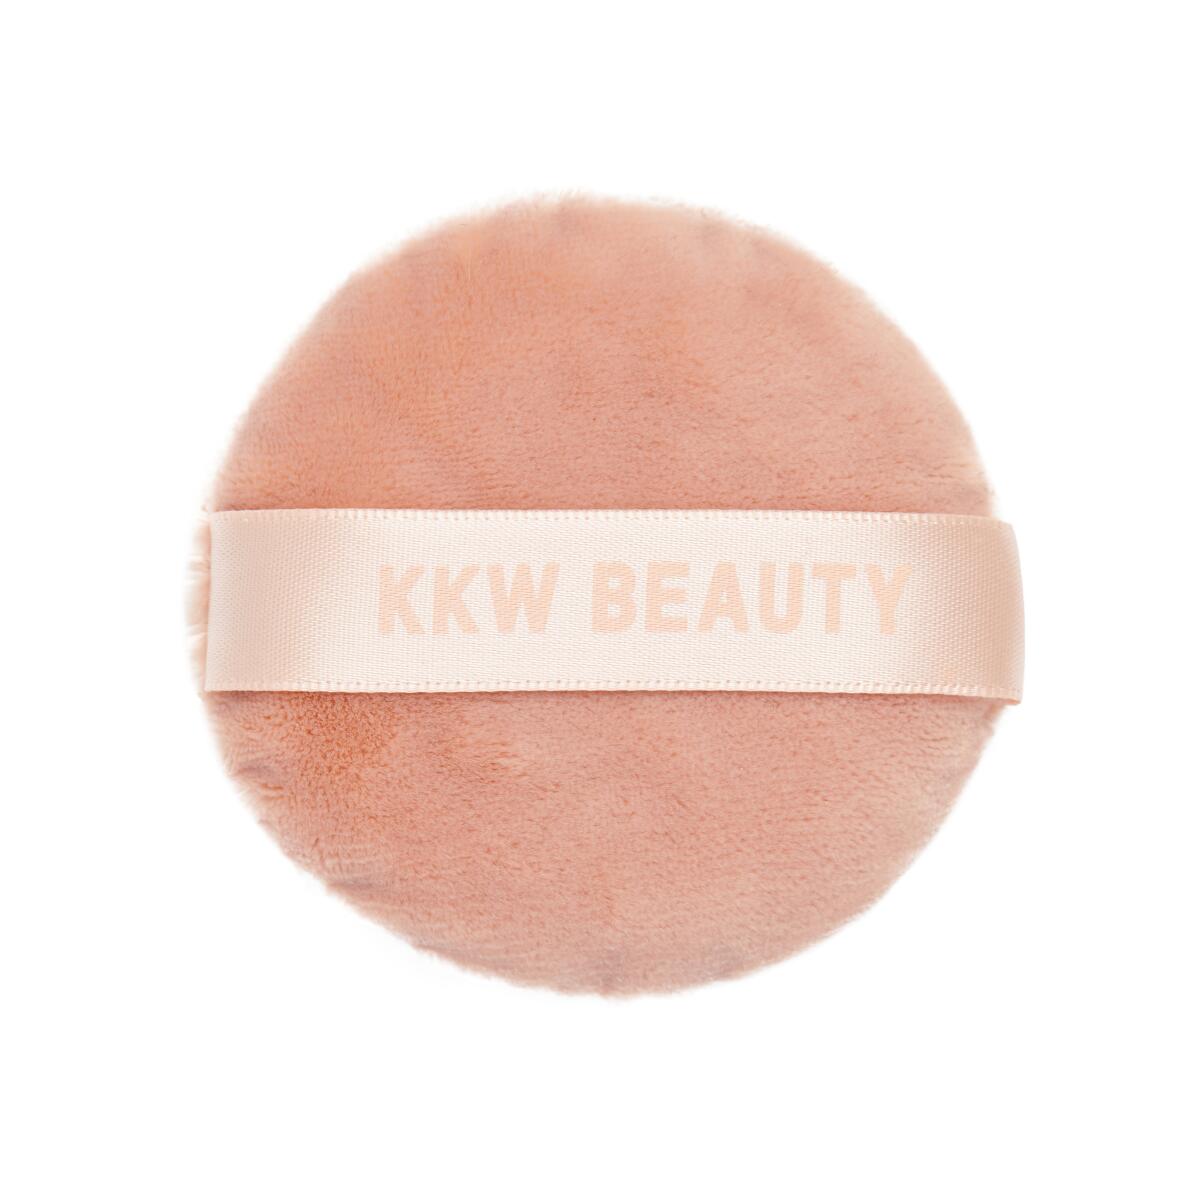 KKW Beauty is introducing a never-before-seen puff, sponge and sharpener and an exclusive cosmetic pouch this holiday season at the brand's Orange County pop-up shop. The puff is $10.